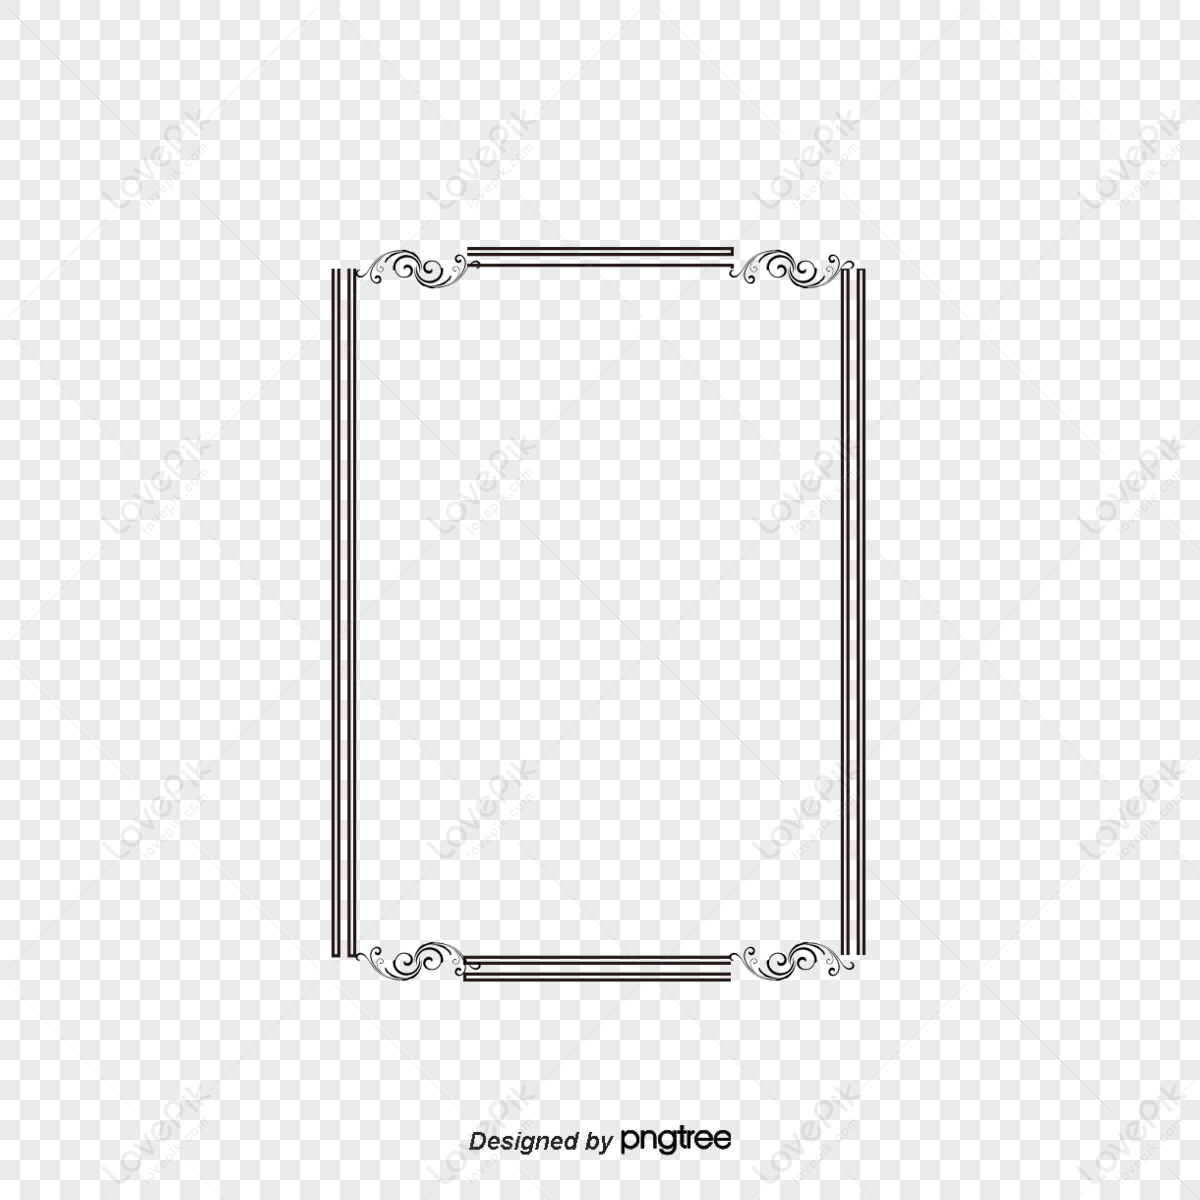 Free Floral Frame PNG Images With Transparent Background | Free ...